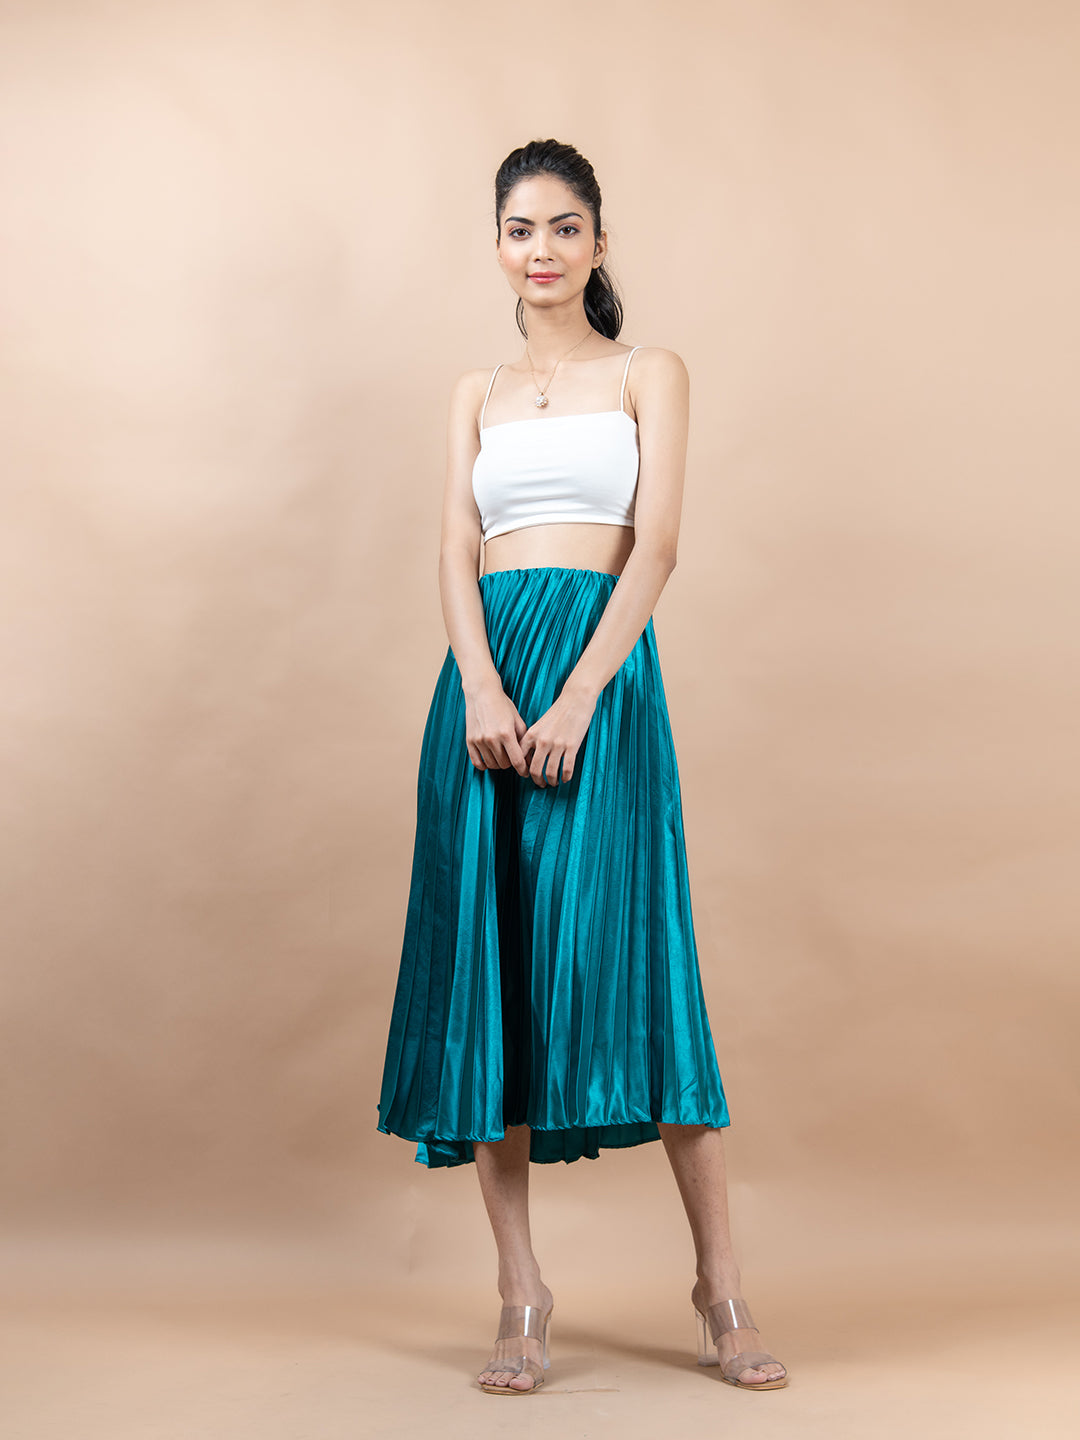 Discover 170+ flared skirts online best